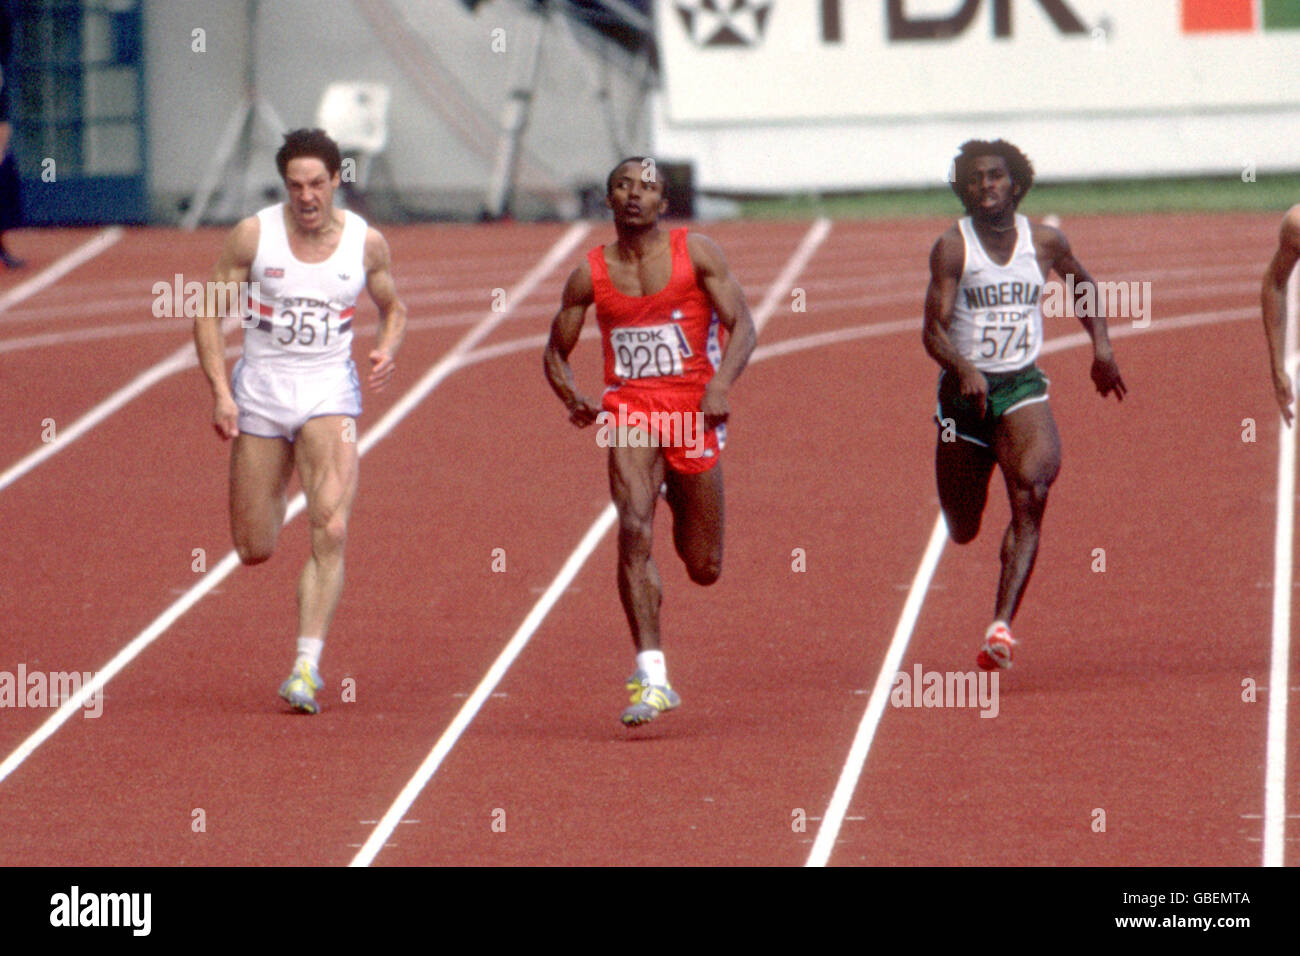 USA's Calvin Smith (c) leads from Great Britain's Alan Wells (l) and Nigeria's Innocent Egbunike (r) Stock Photo